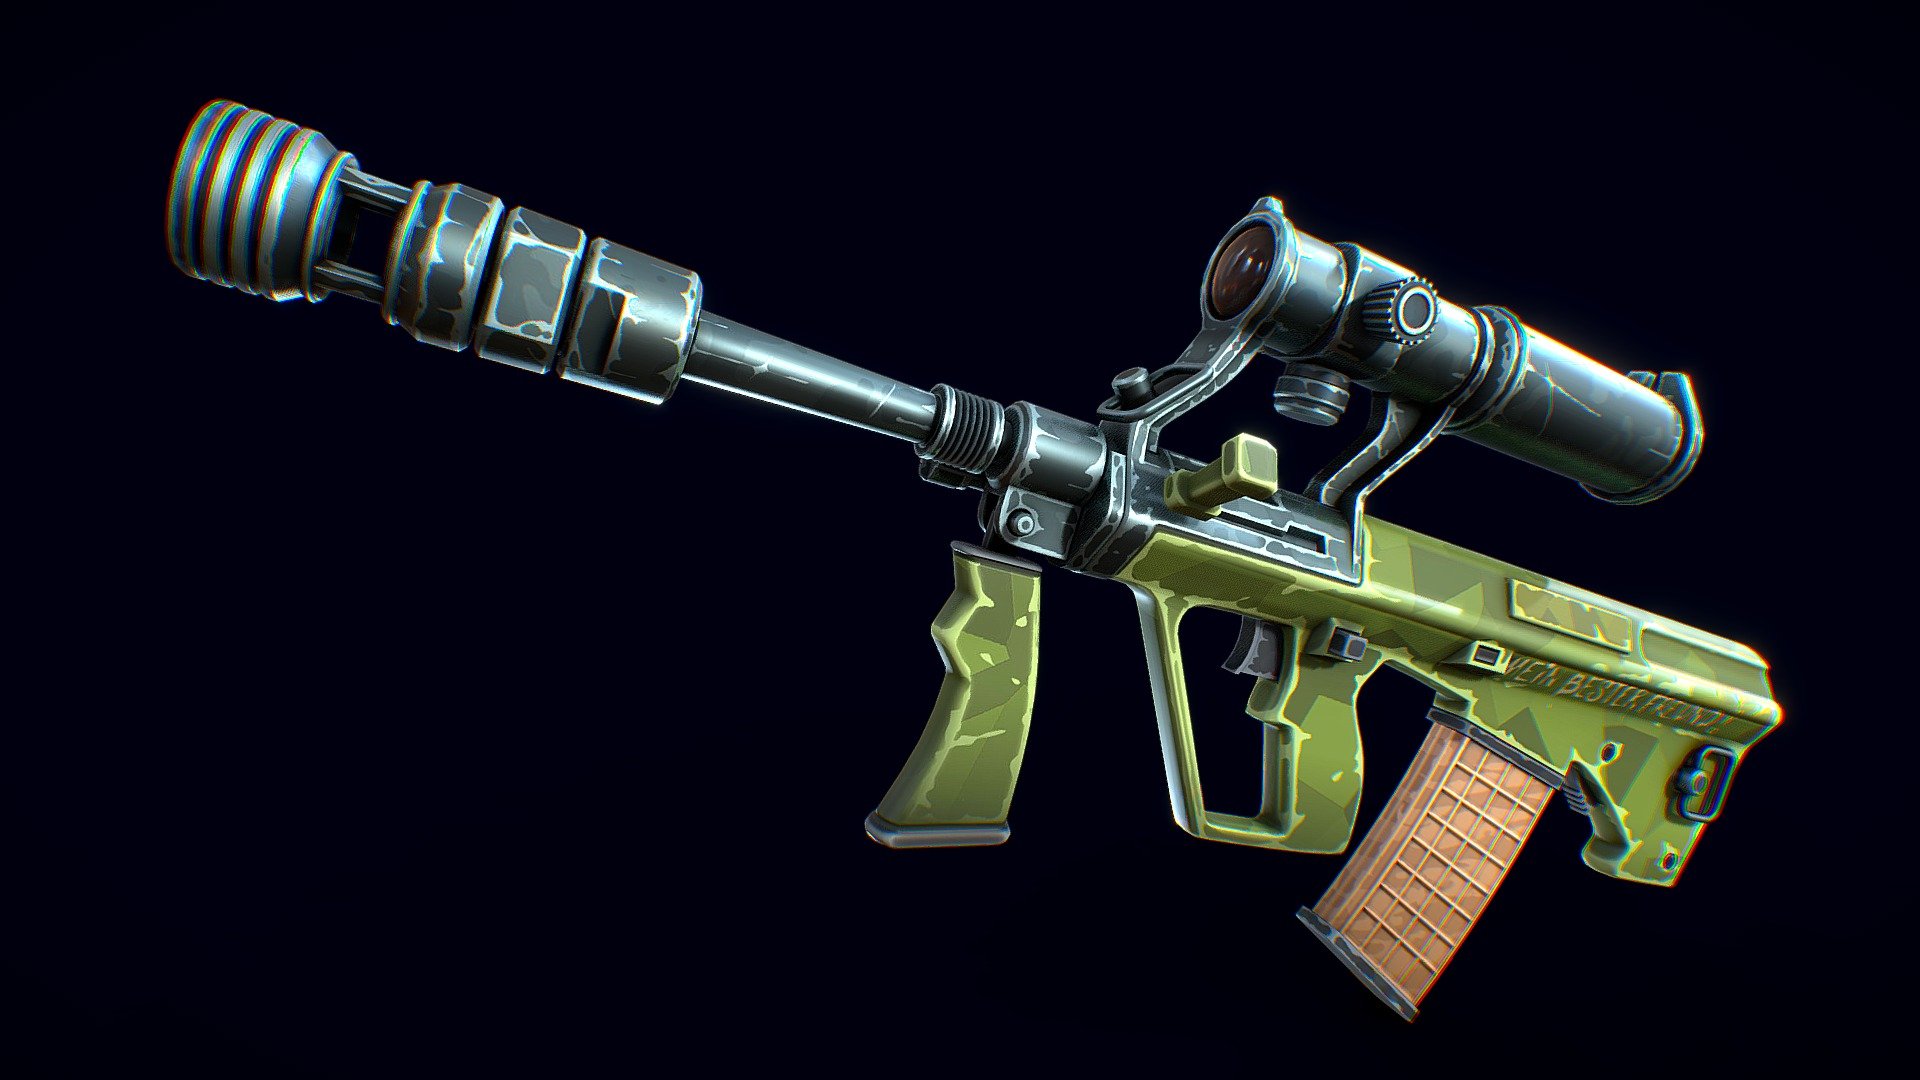 Low-poly 3D model of a Stylized Steyr AUG doesn’t contain any n-gons and has optimal topology. This model has a set of 2K textures 3d model